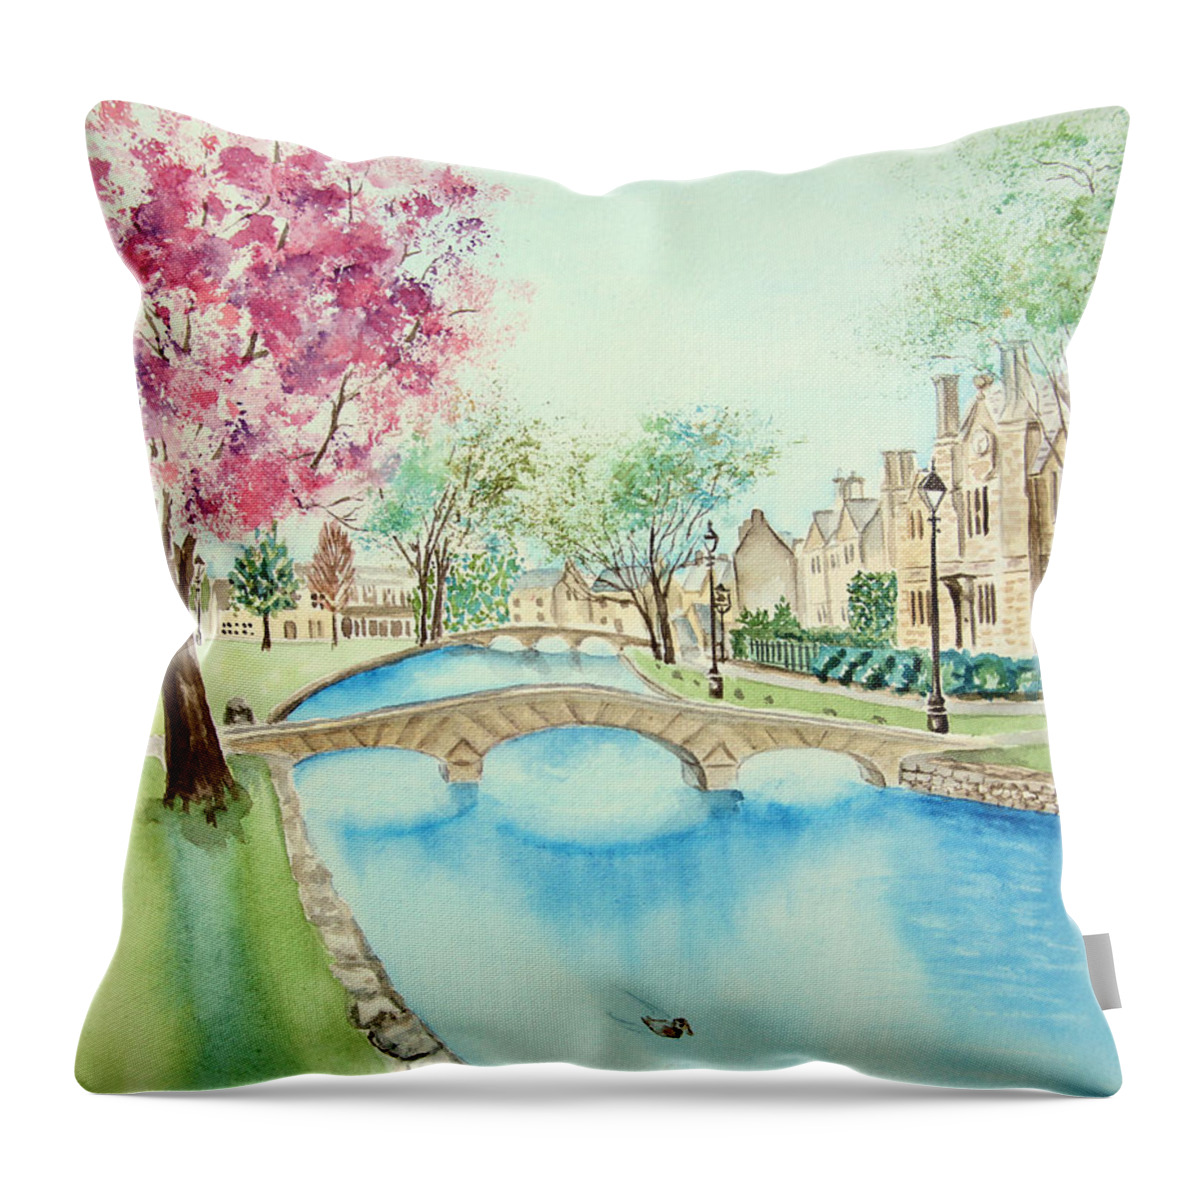 Villages Throw Pillow featuring the painting Summer in Bourton by Elizabeth Lock